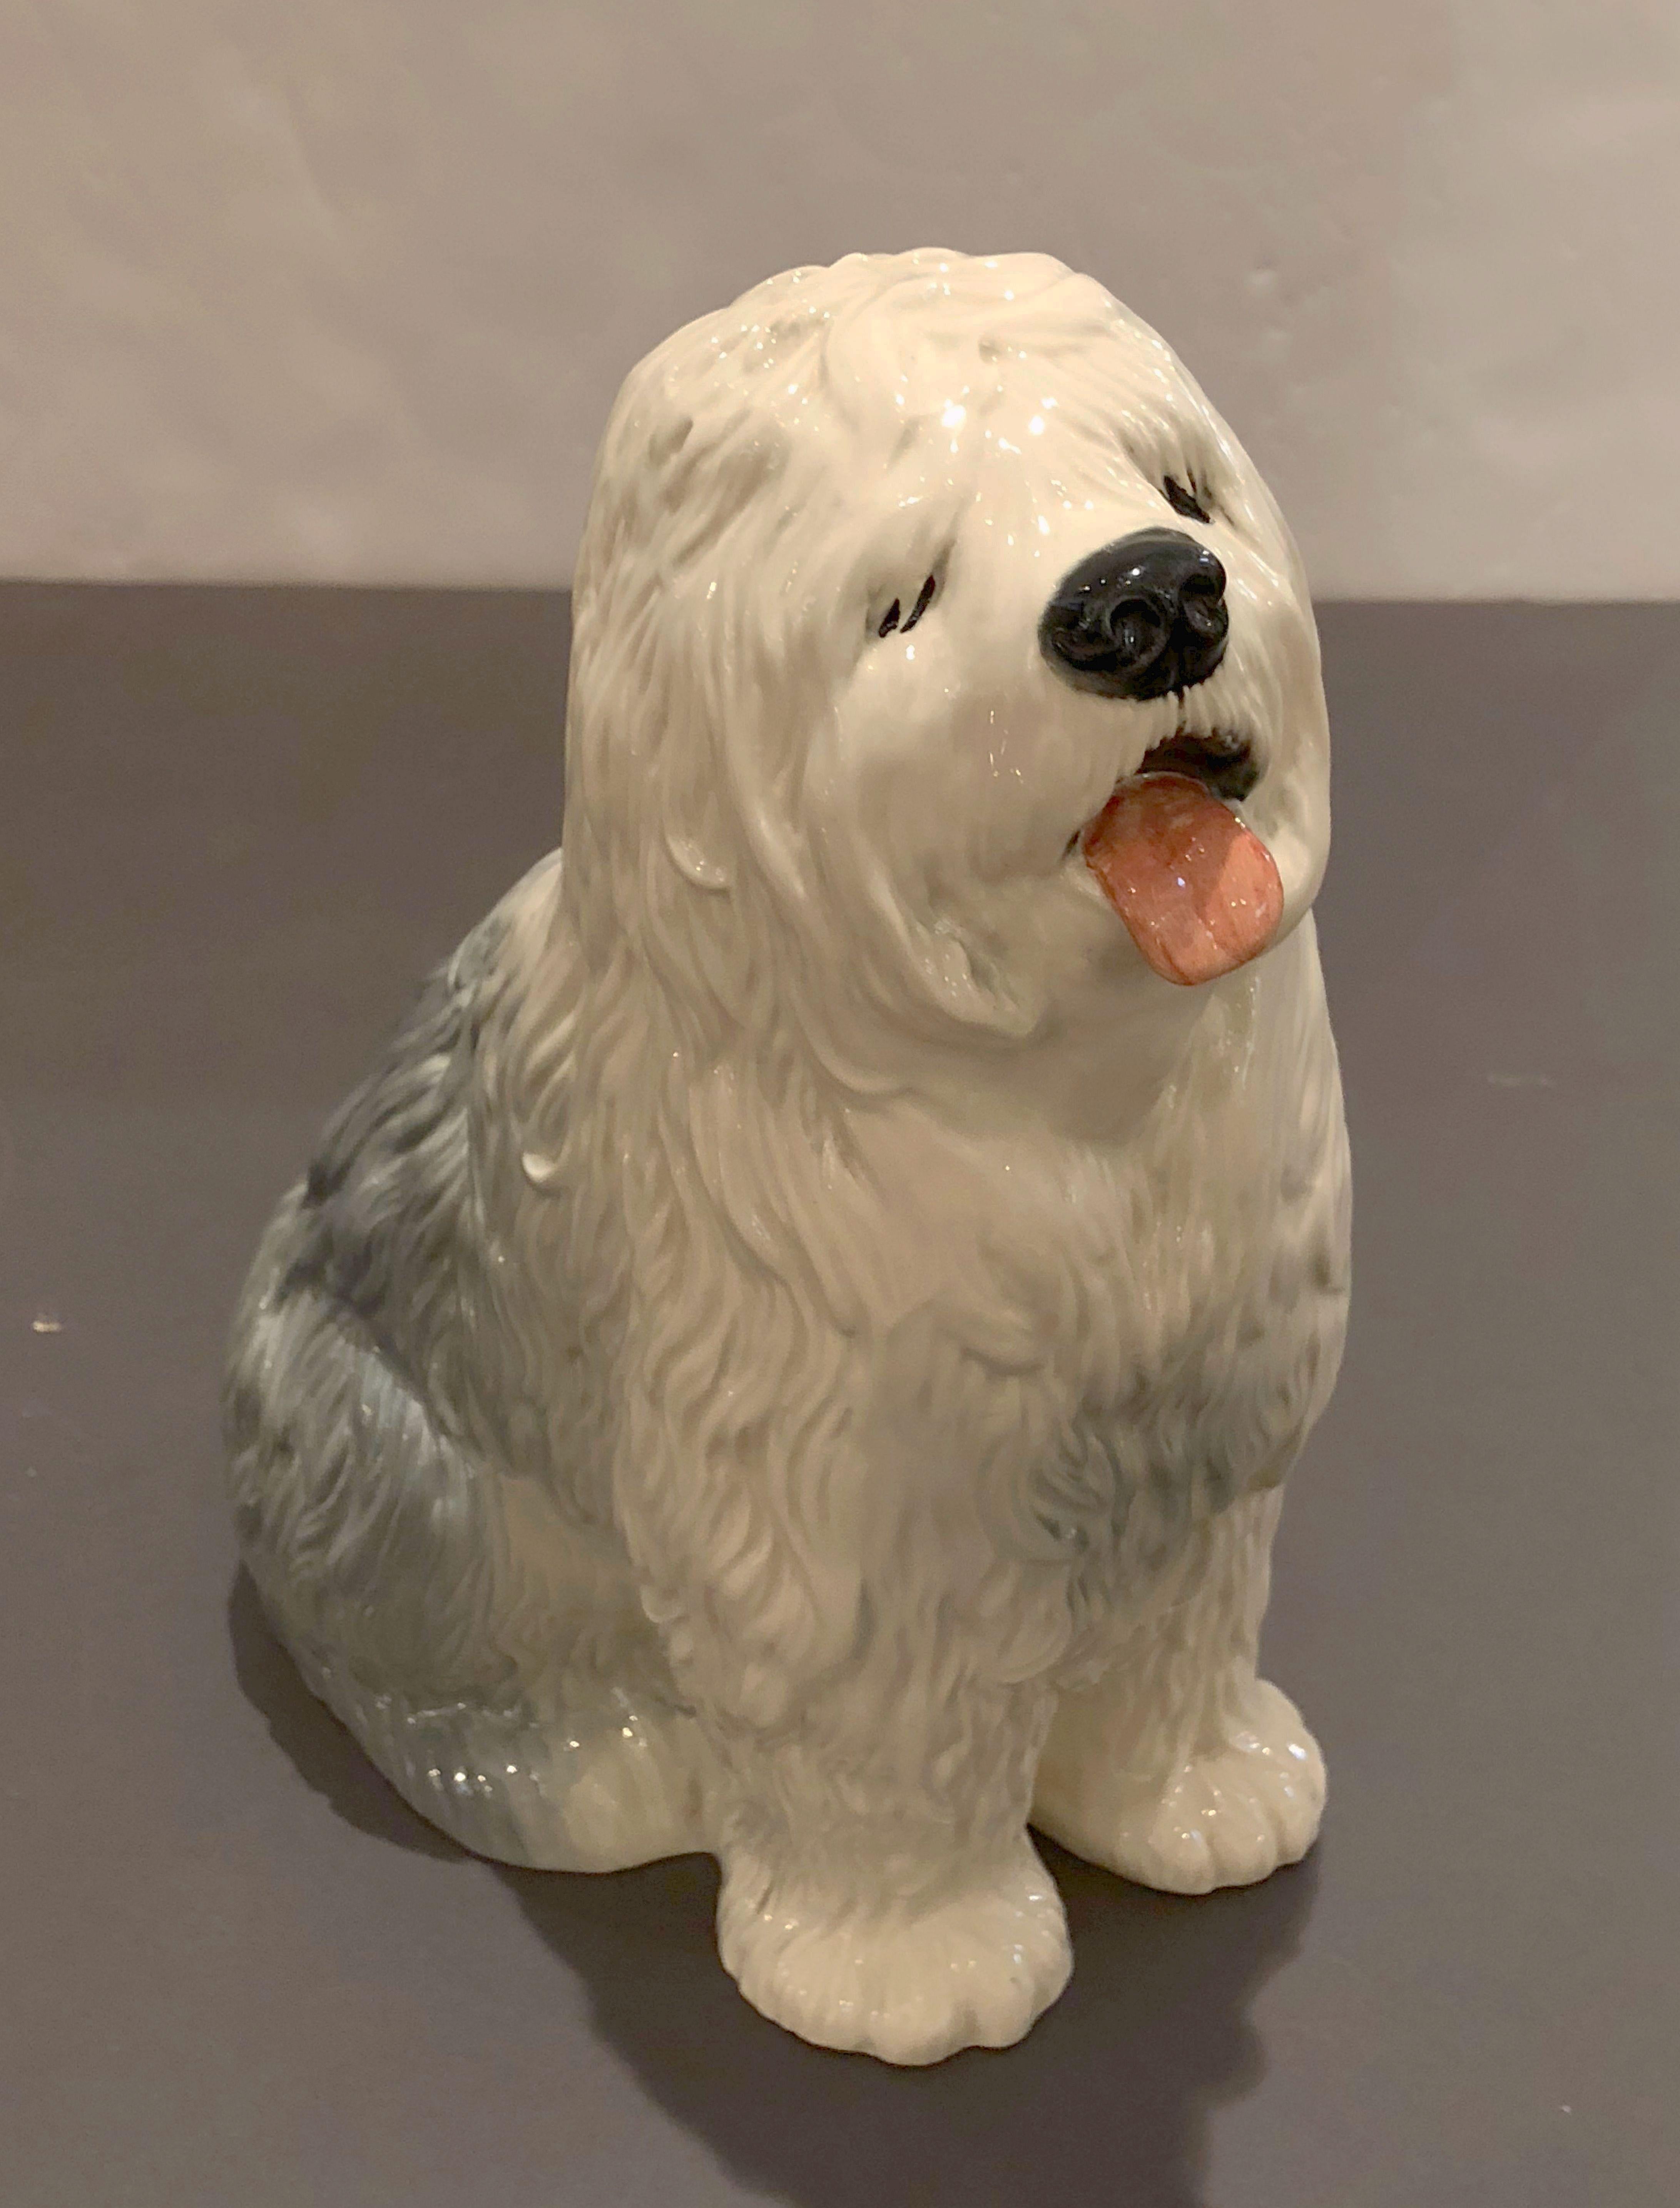 A handsome ceramic figural sculpture of an Old English sheepdog by the celebrated English pottery firm, Beswick.

The dog model stands approximately 11 1/4 inches in height and is in excellent condition.

Impressed model number to the base is